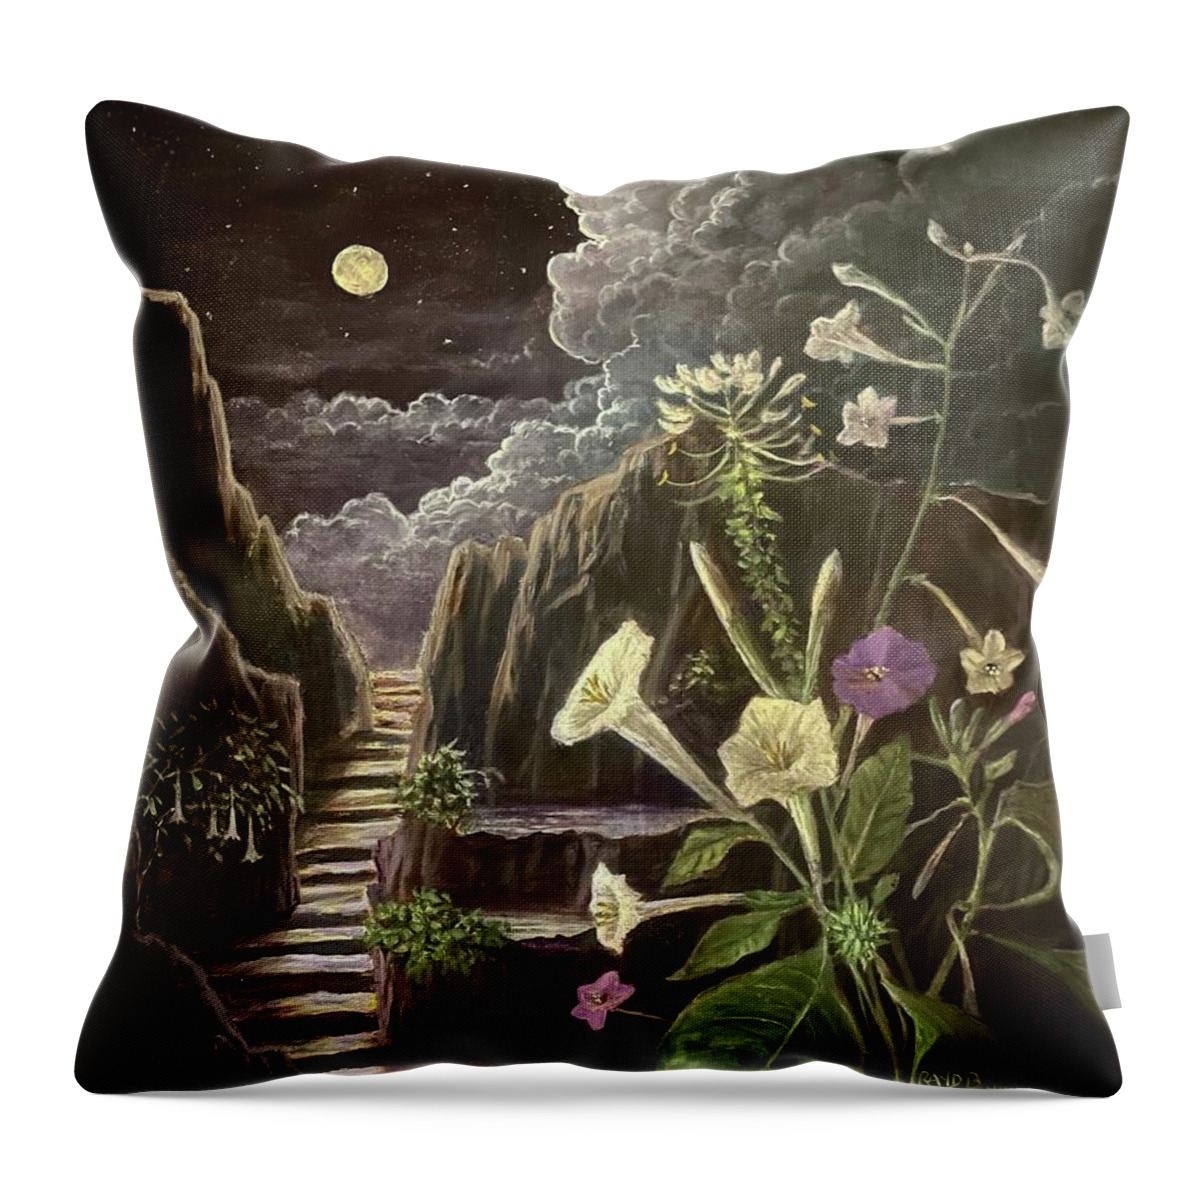 Trumpets Throw Pillow featuring the painting Trumpets Of The Night by Rand Burns